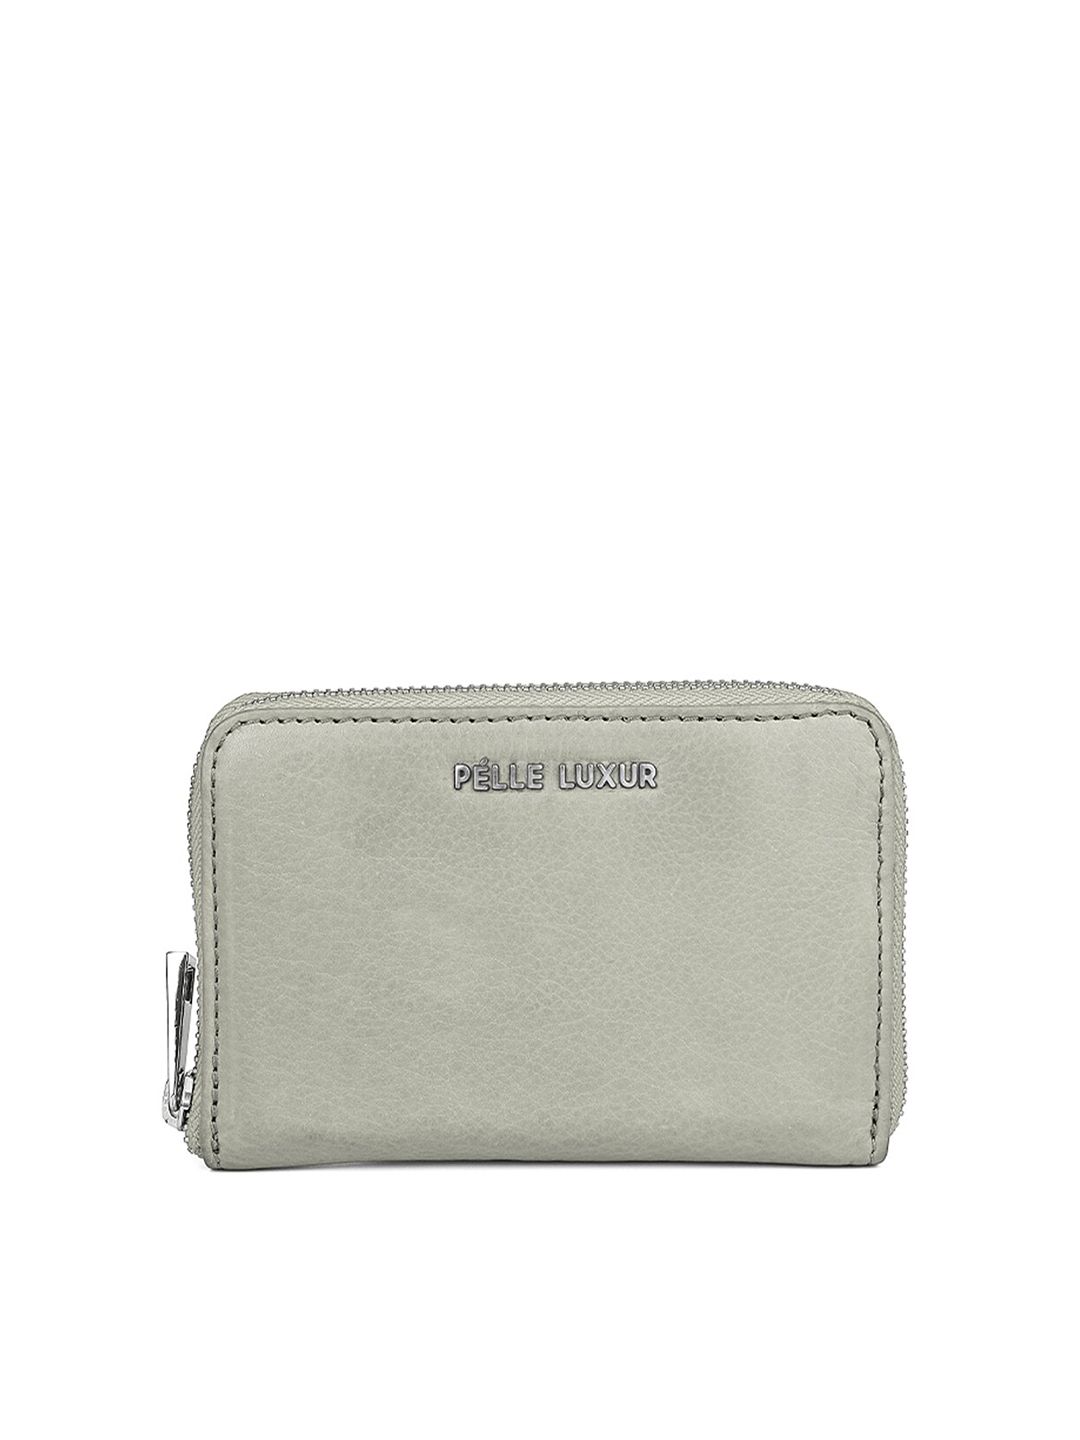 PELLE LUXUR Women Taupe Leather Zip Around Wallet Price in India